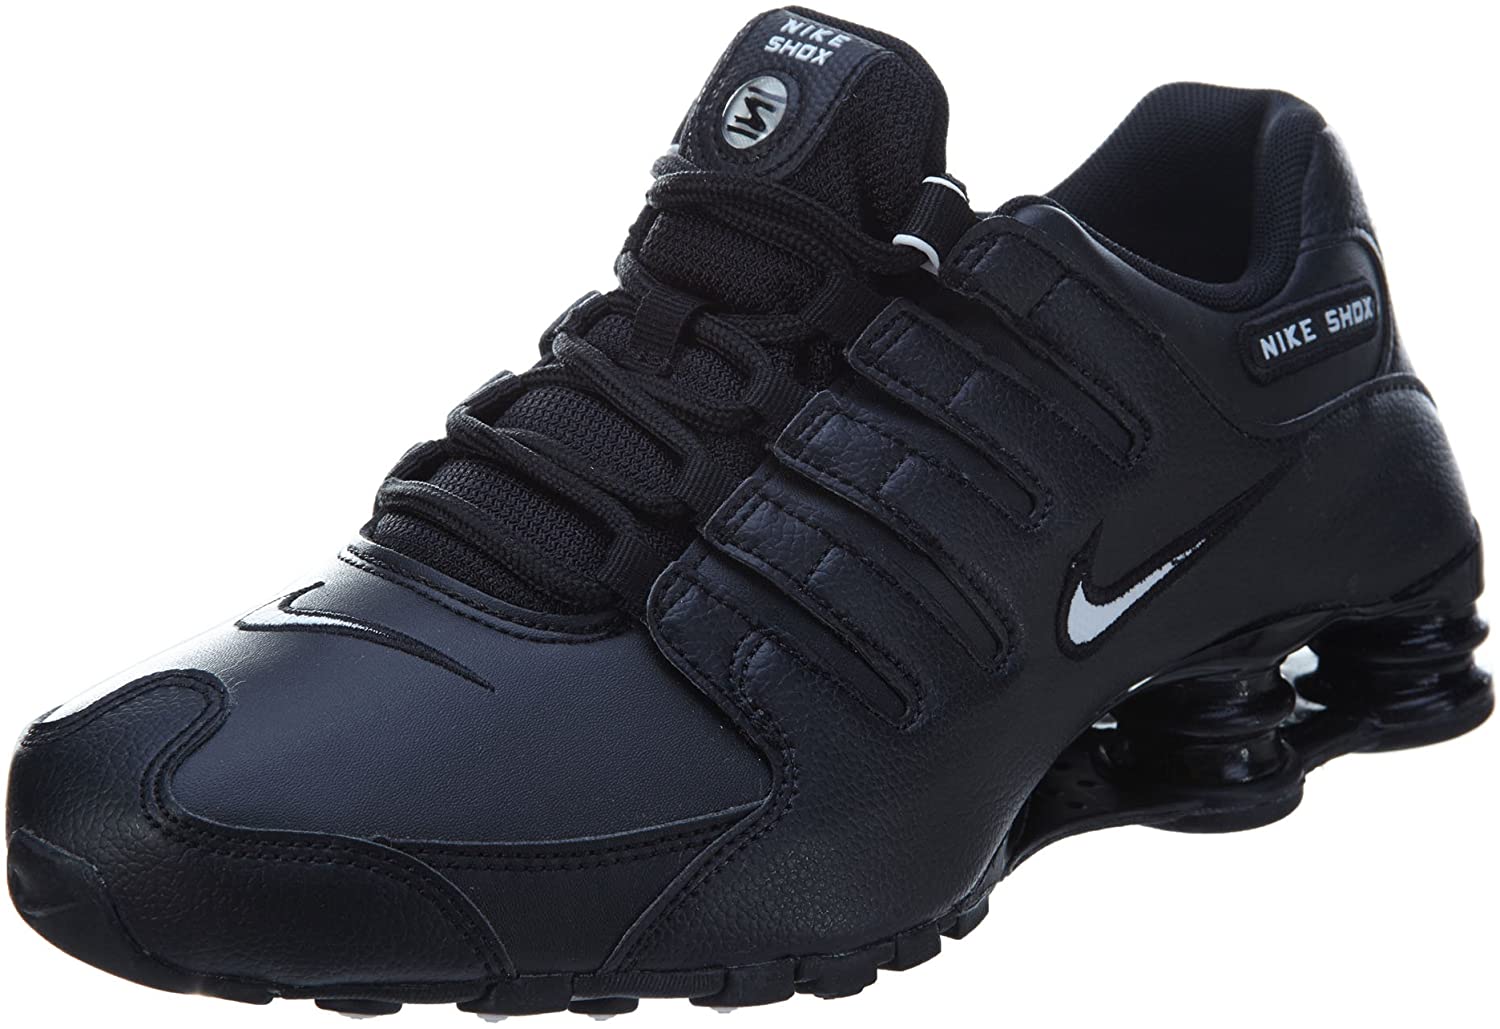 Mens Nike Shox Size 10: Review And Comparison With Other Sizes And ...